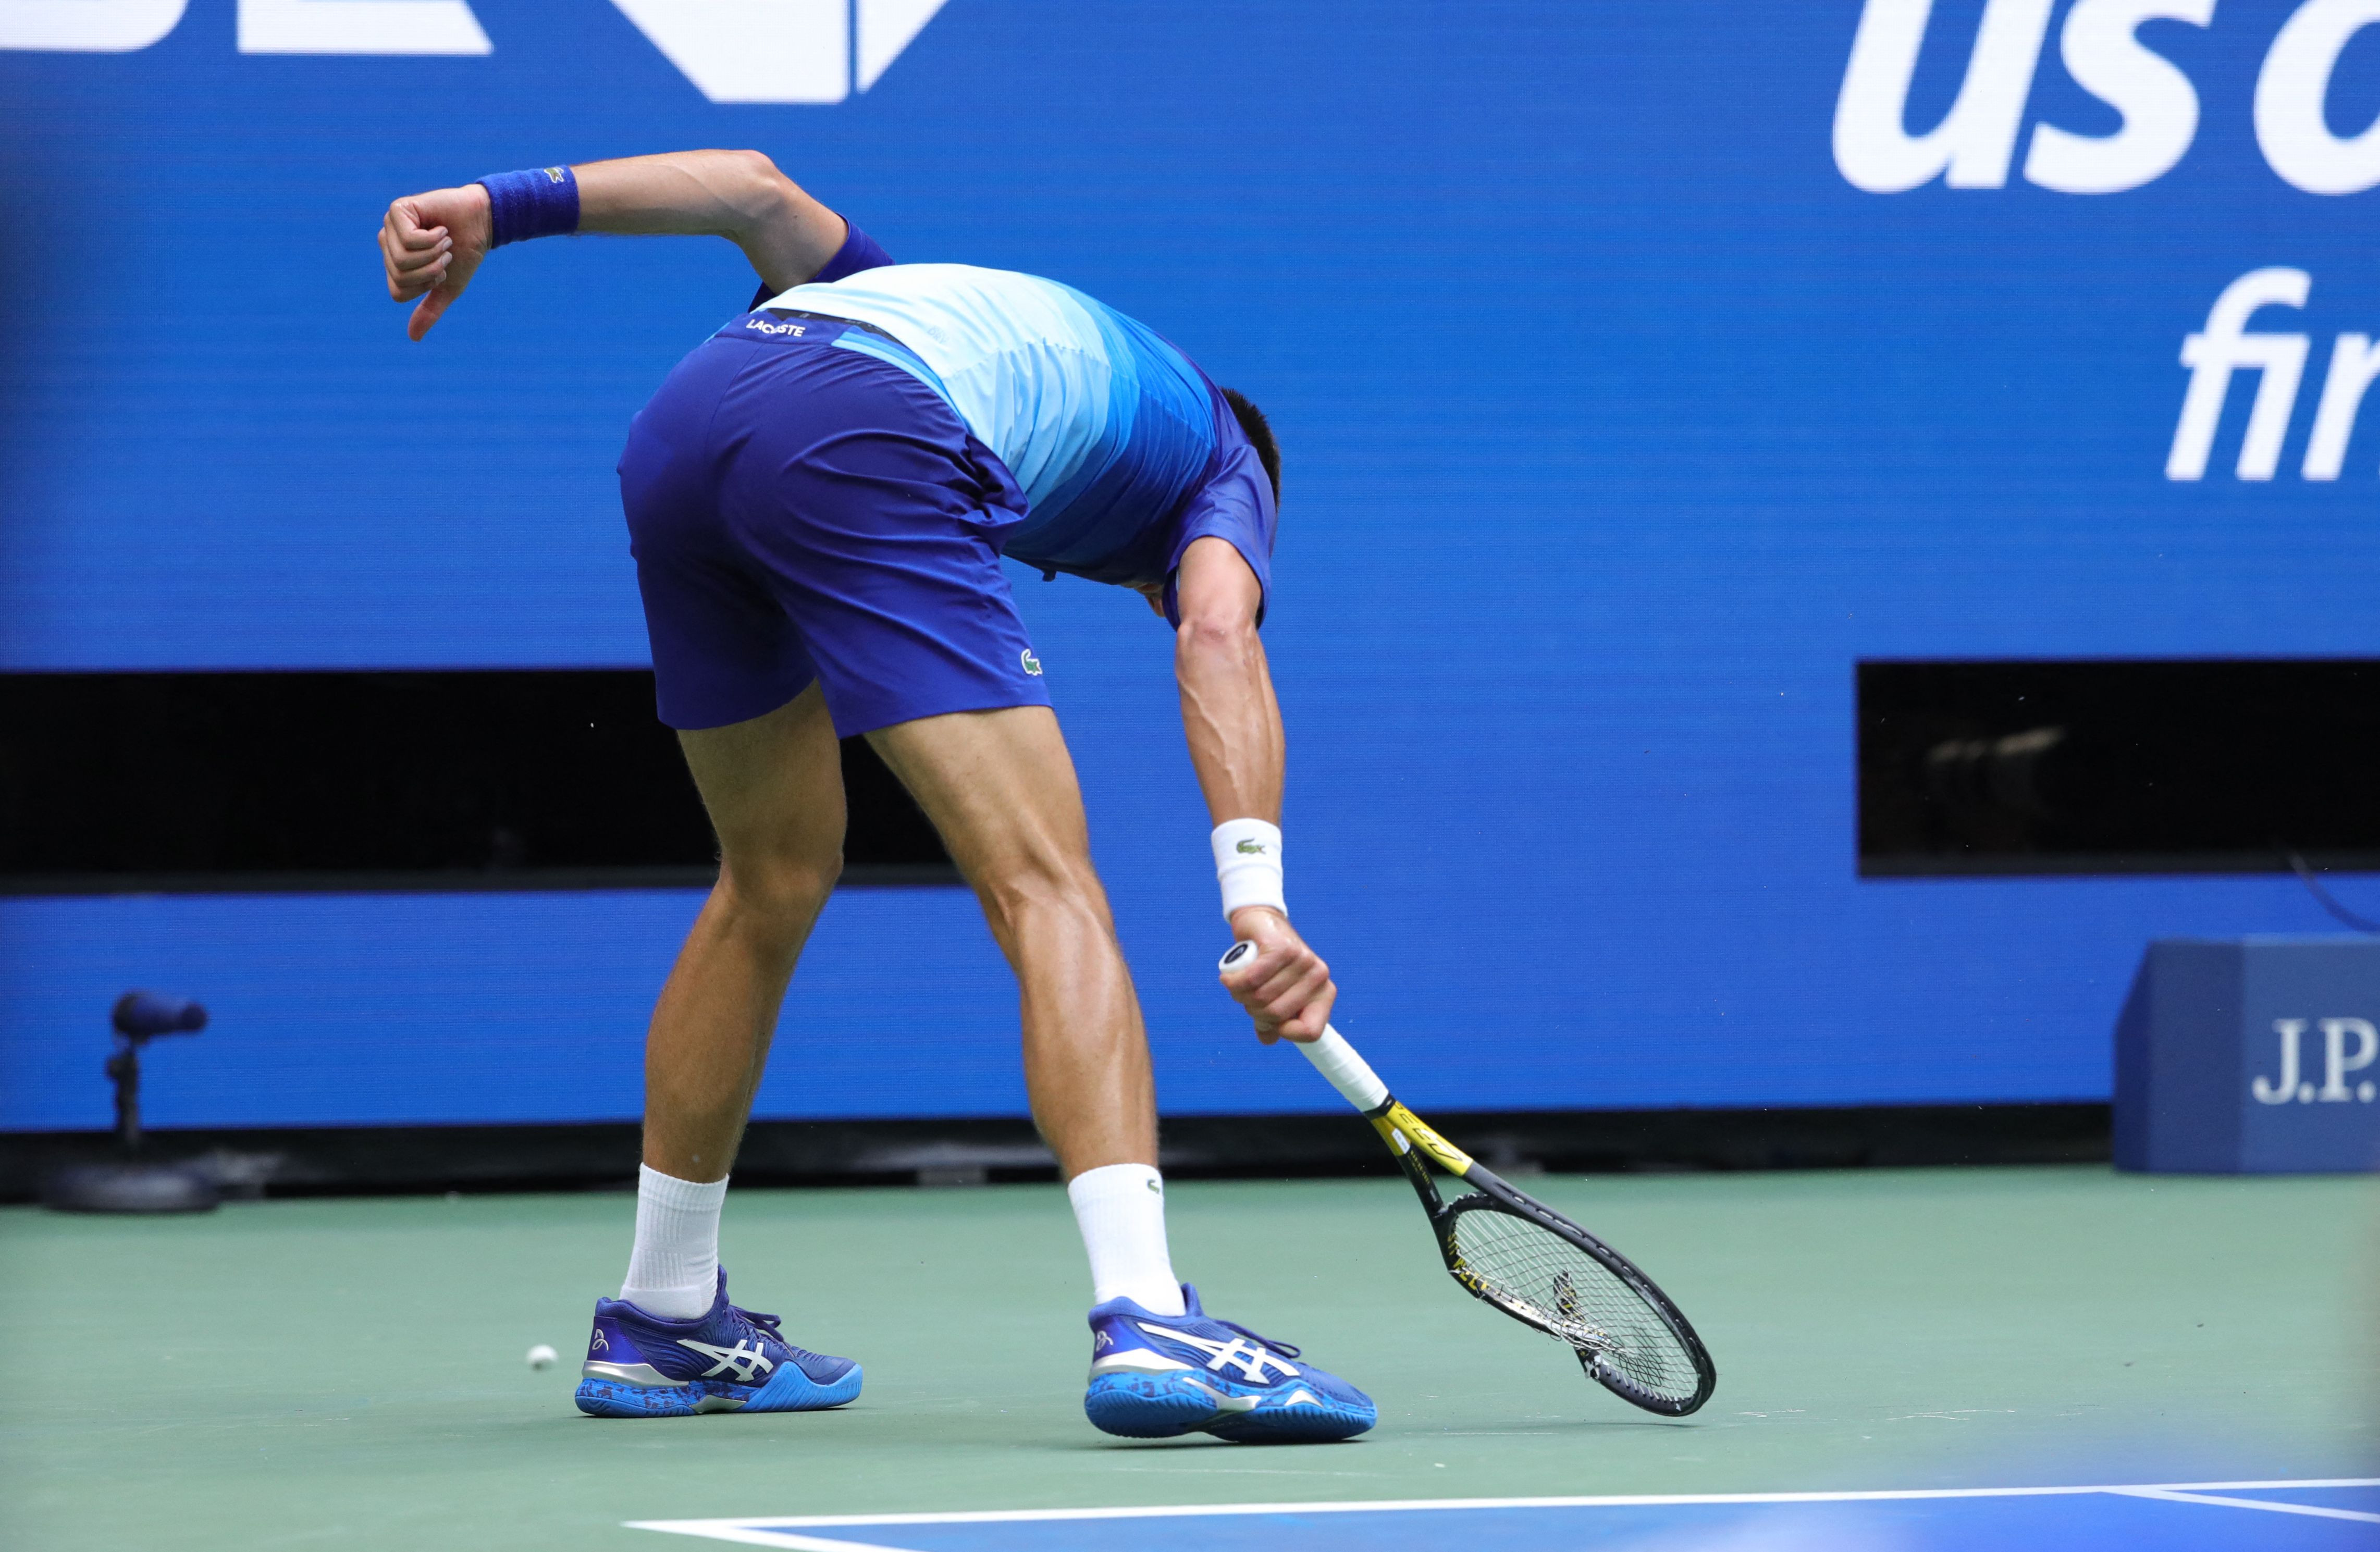 Novak Djokovic booed by US Open crowd and given warning after smashing racket